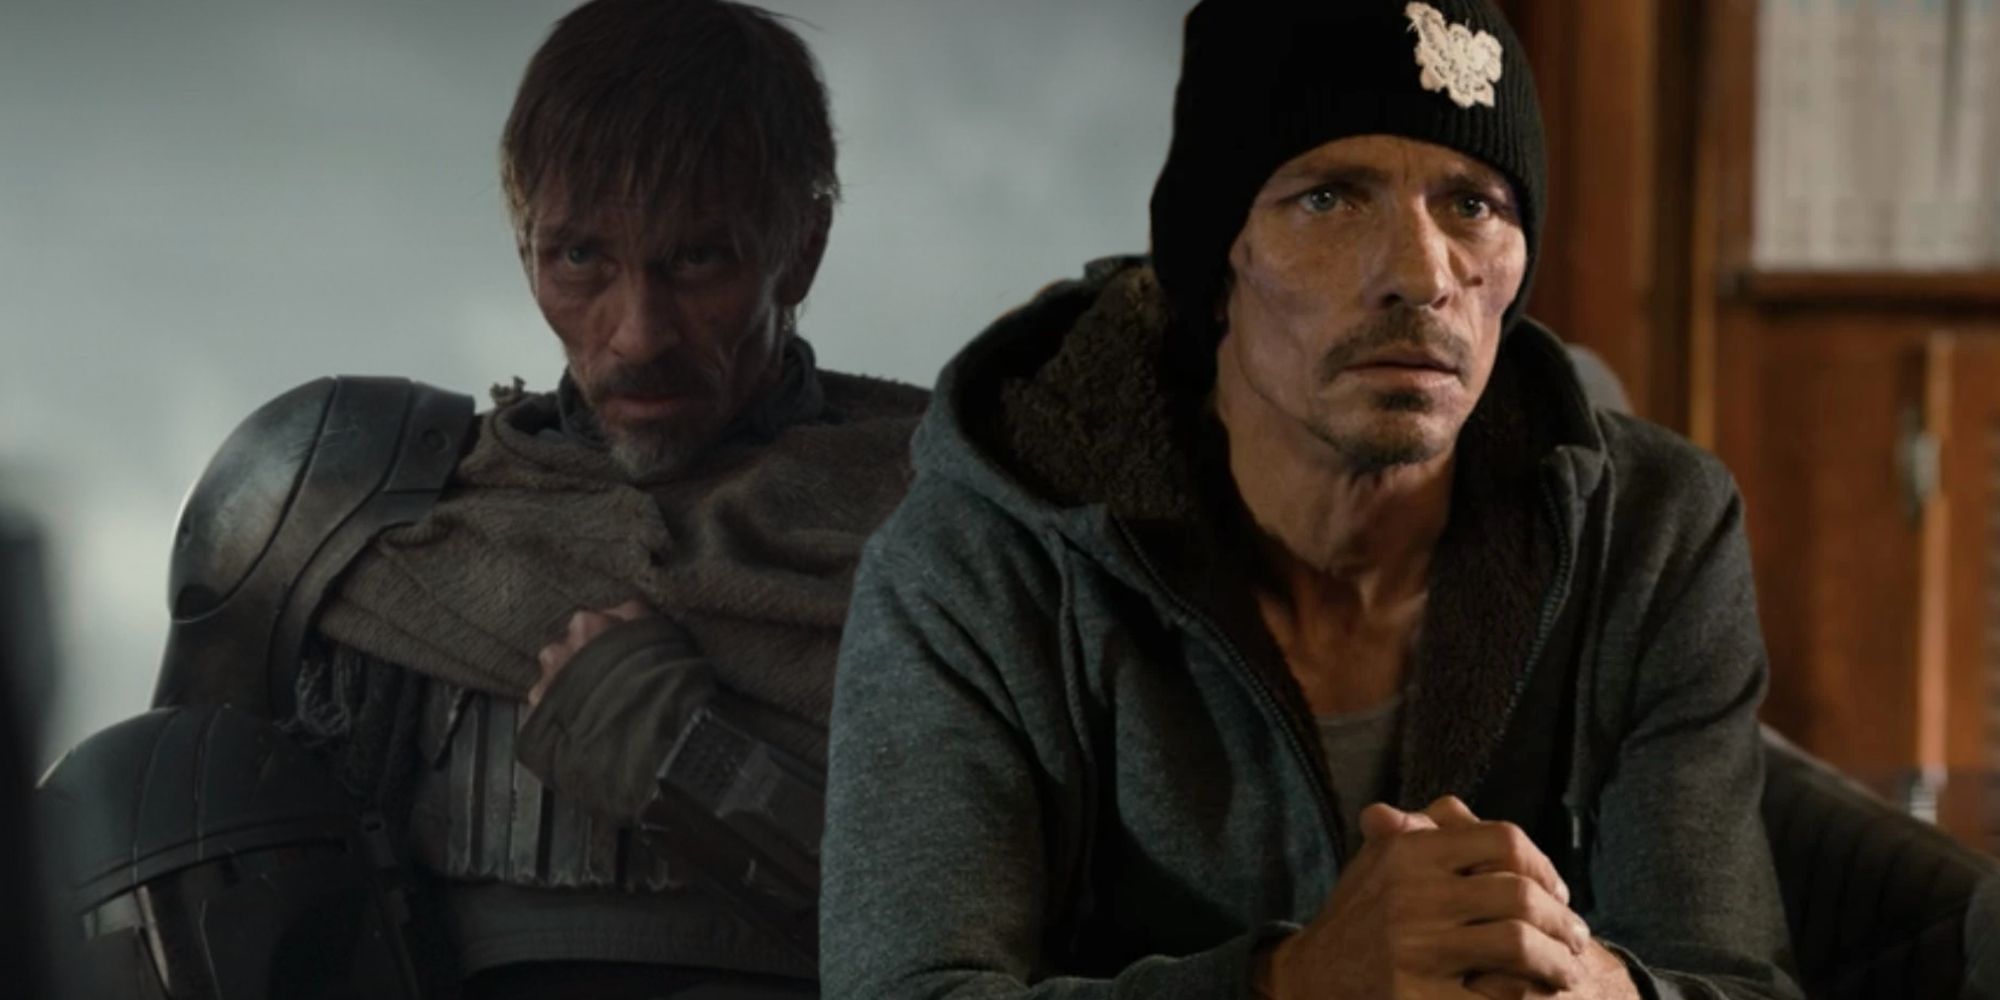 Charles Baker as a Mandalorian scount and Skinny Pete from Breaking Bad